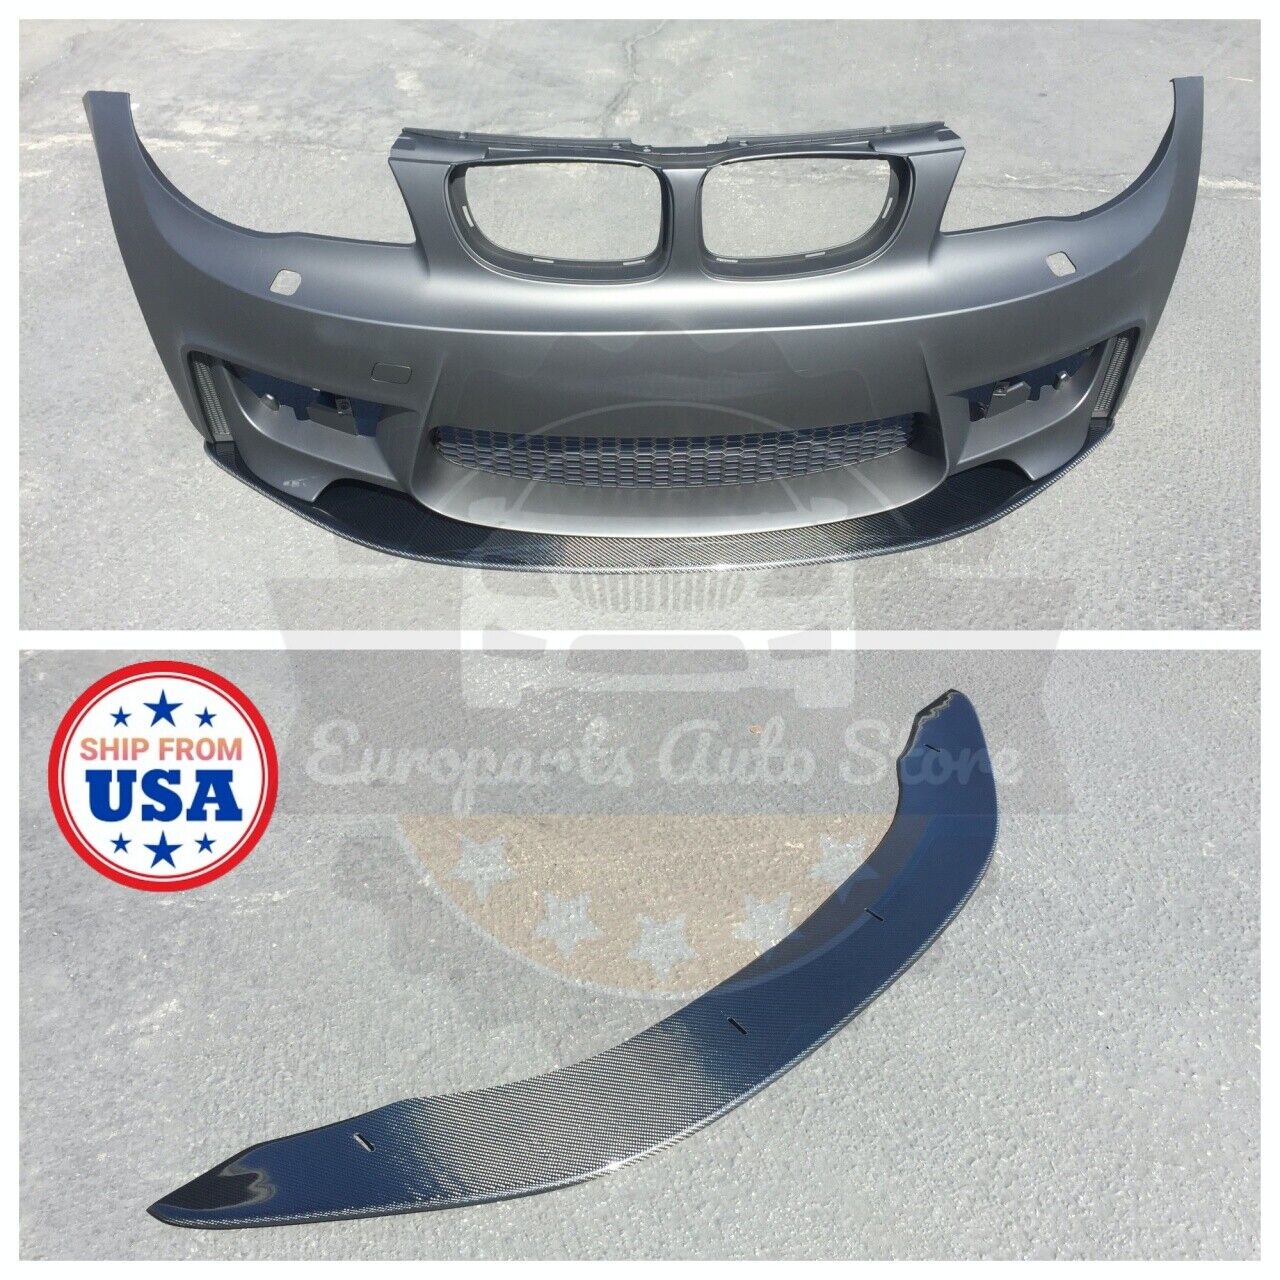 E82 CARBON FIBER FRONT LIP SPLITTER *ONLY FOR 1M & 1 SERIES WITH 1M STYLE BUMPER